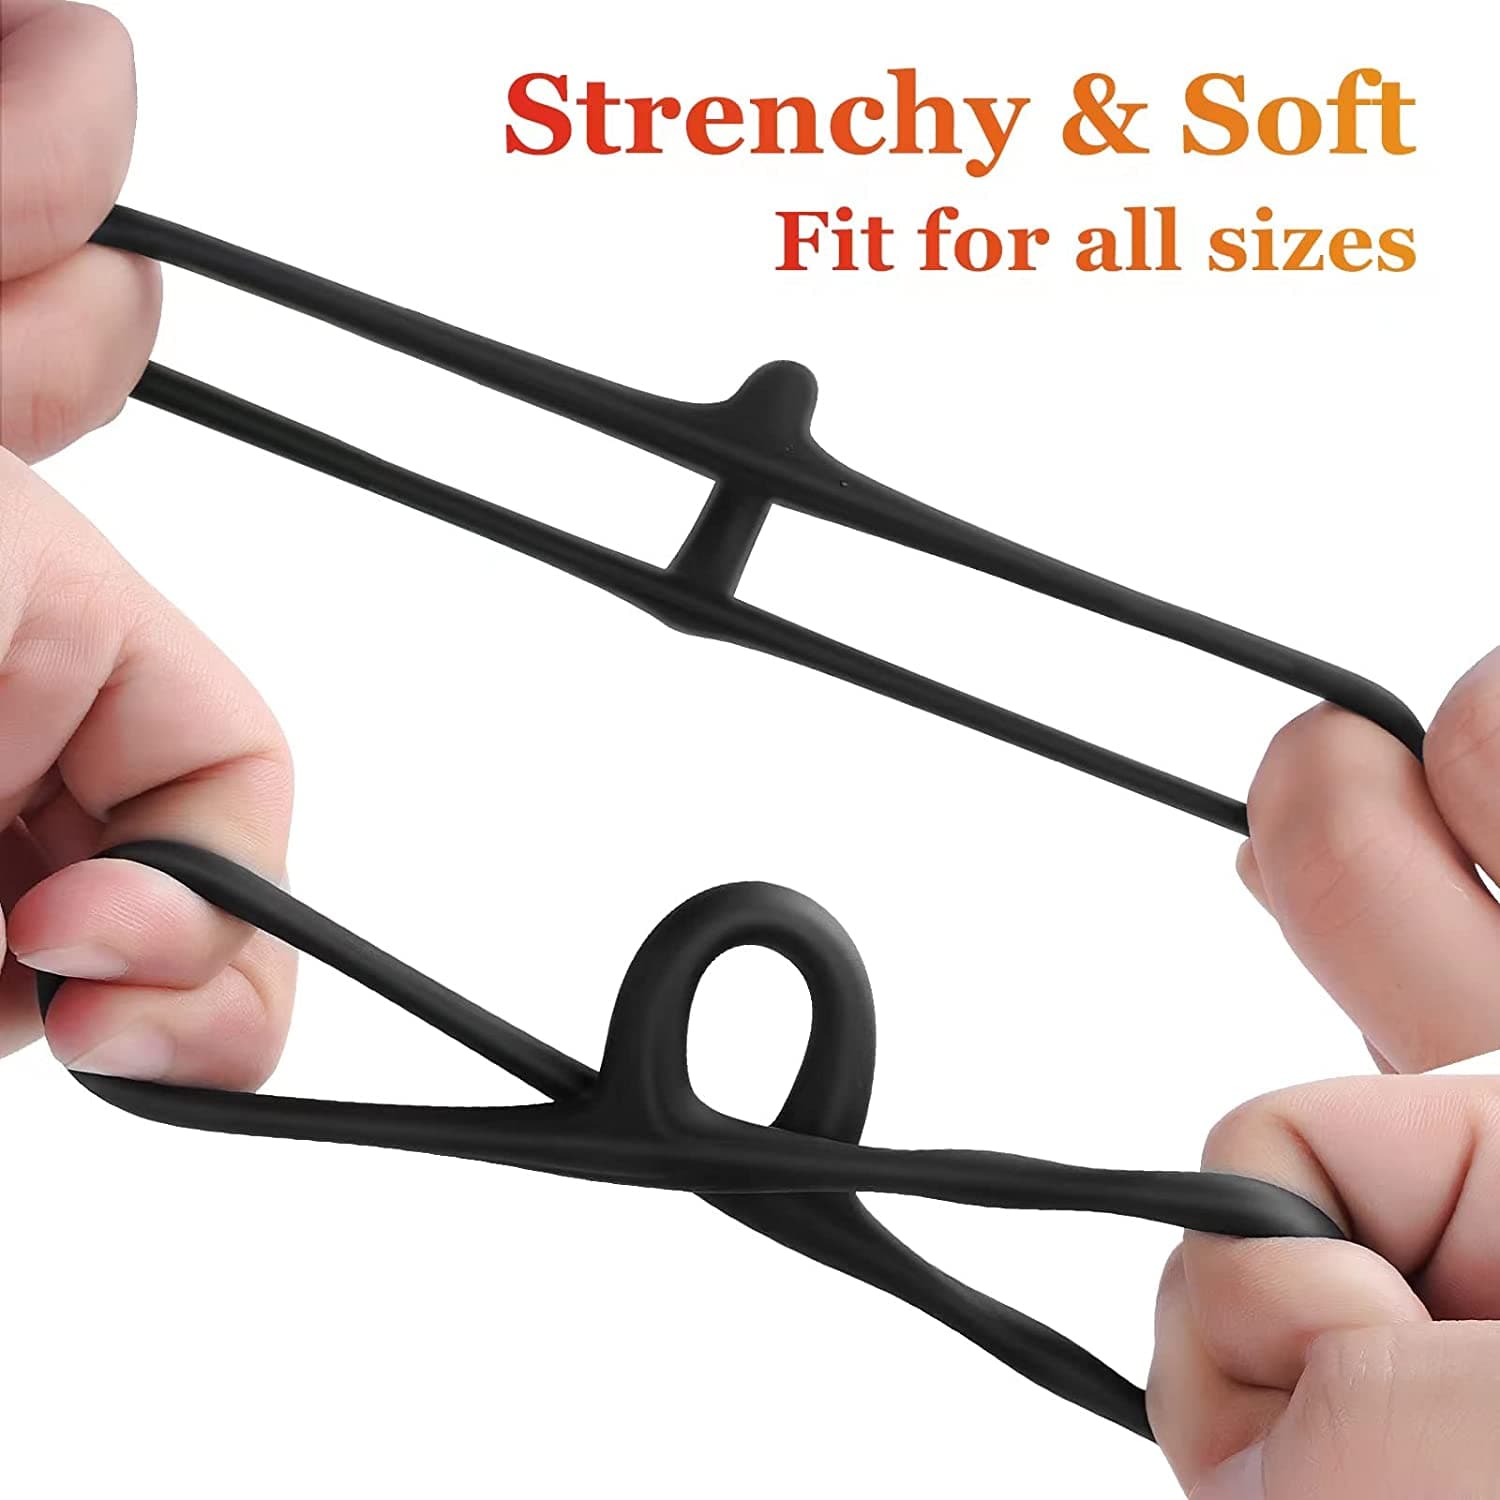 3 in 1 super soft and flexible male penis ring enlargement device